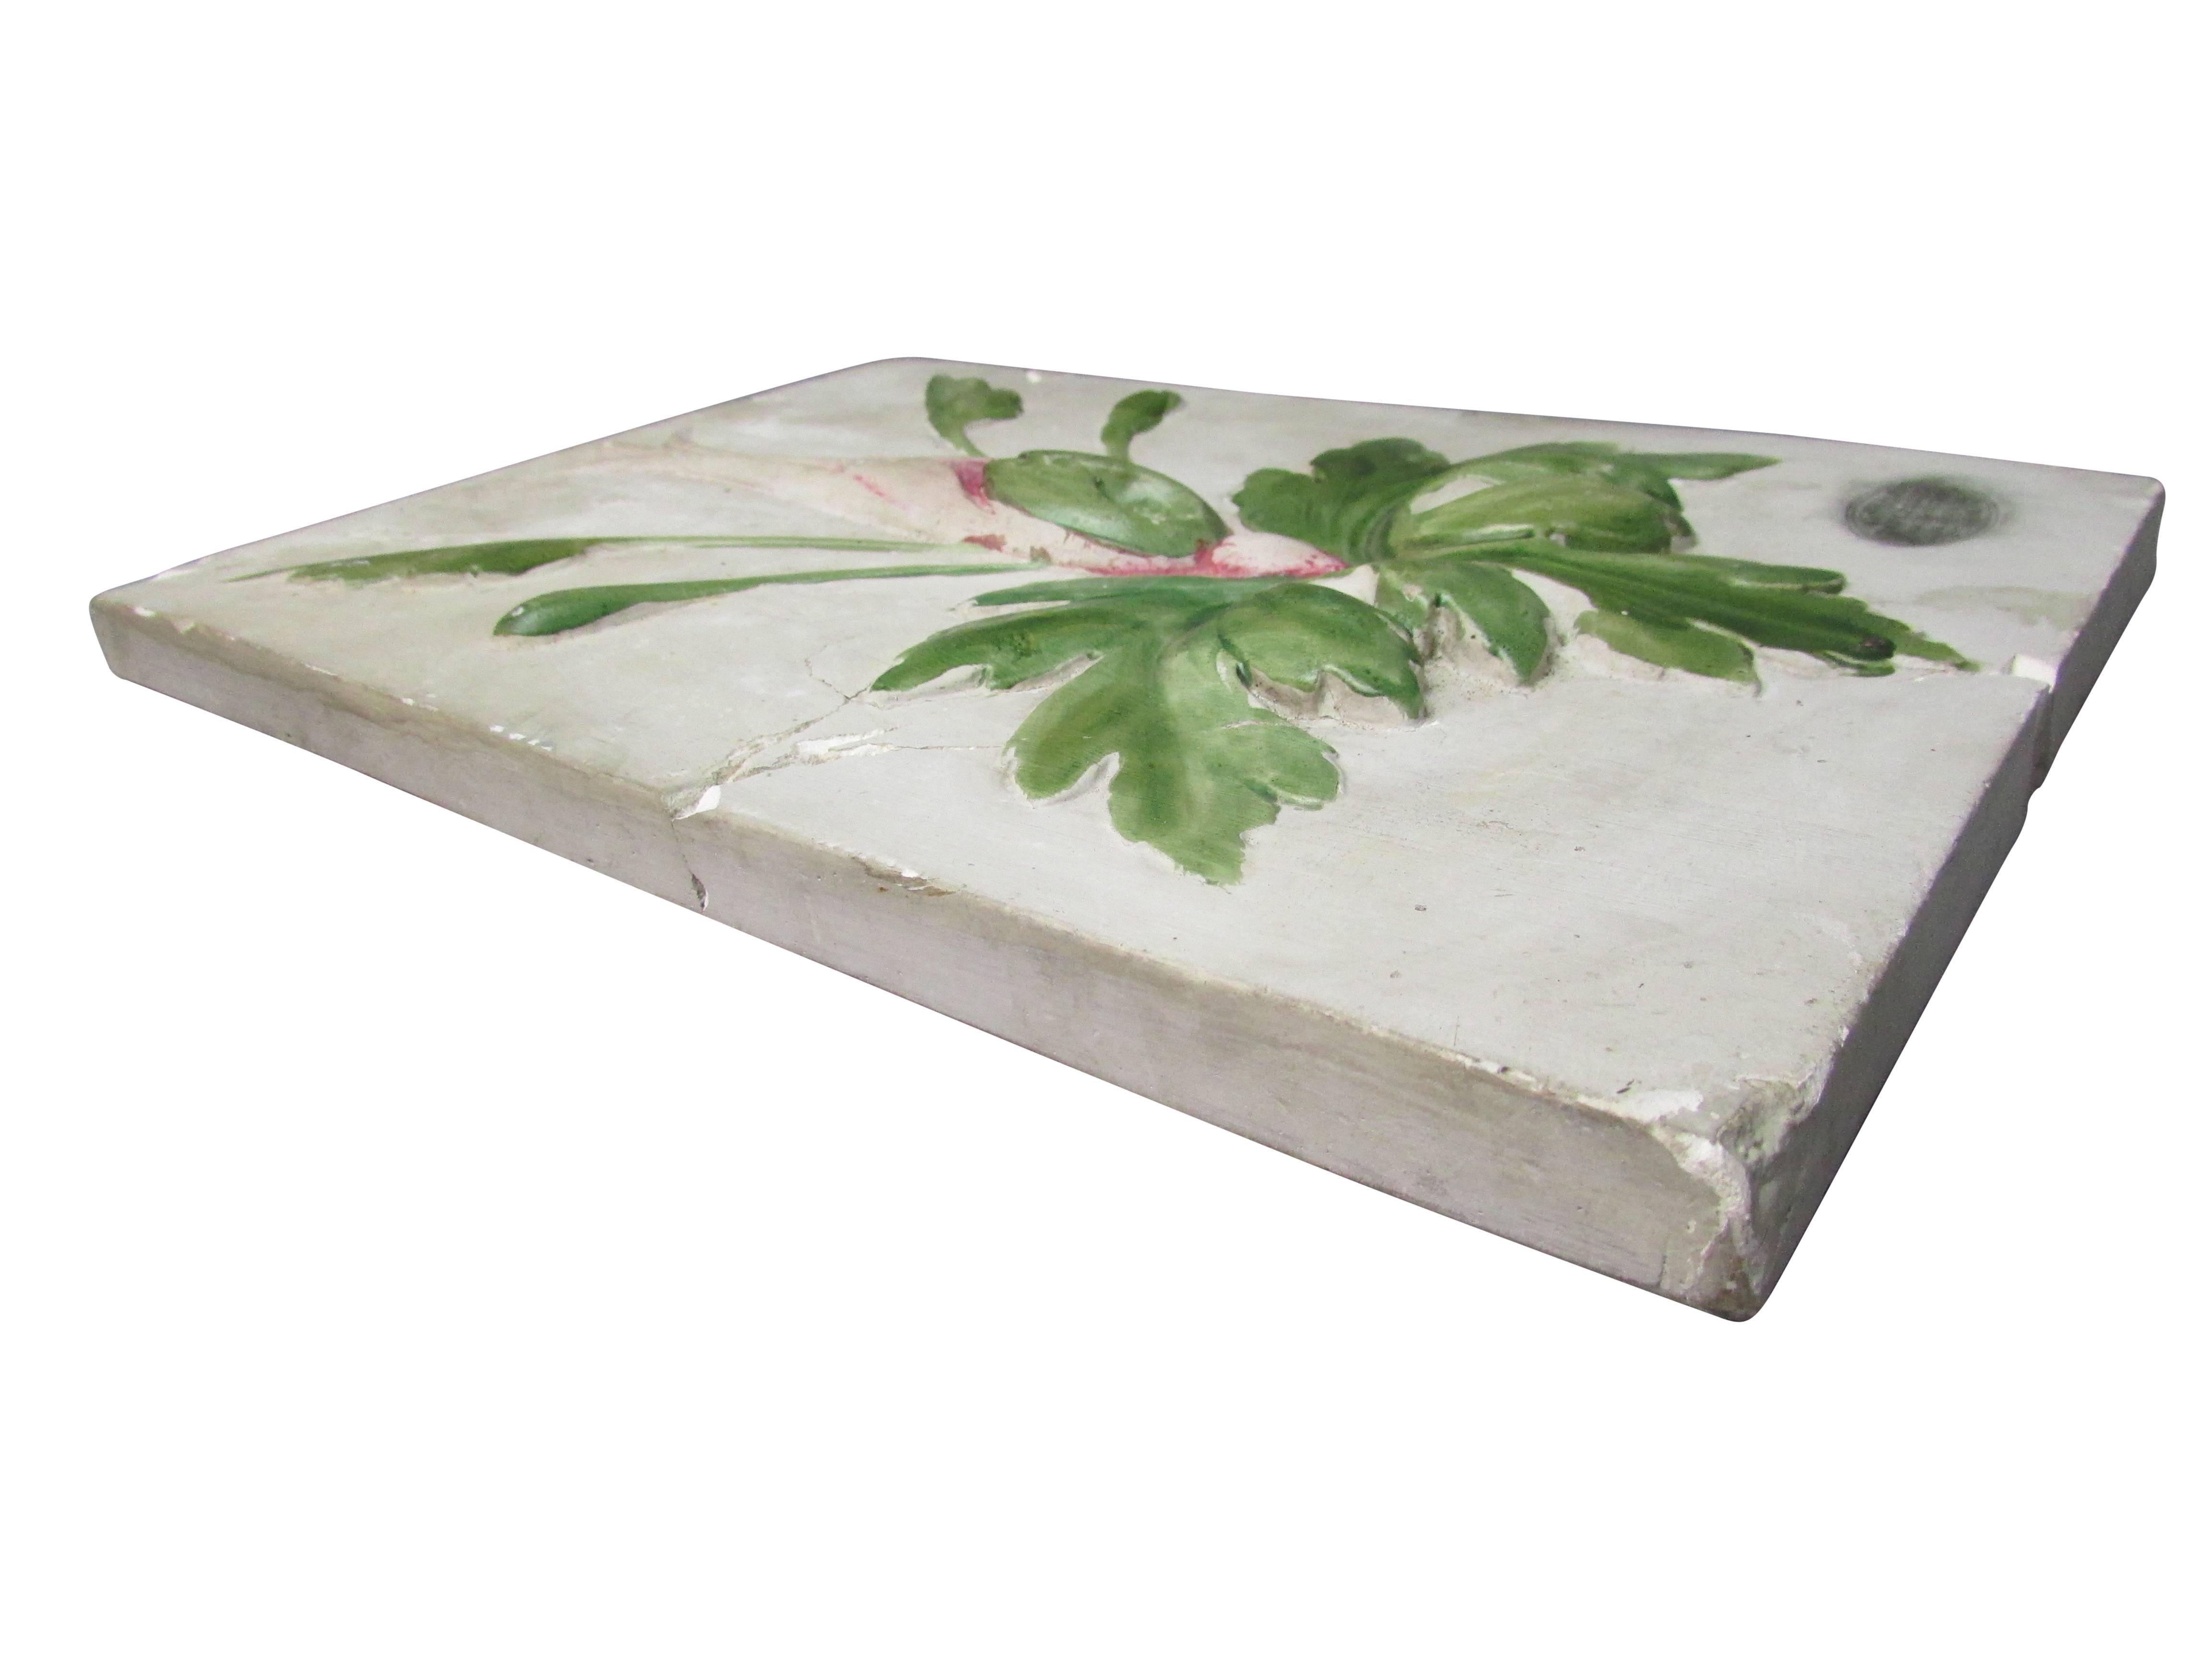 This is a hand-painted 19th century French educational plaster cast botanical plaque made by revered Parisian cast maker M. Gherardi.